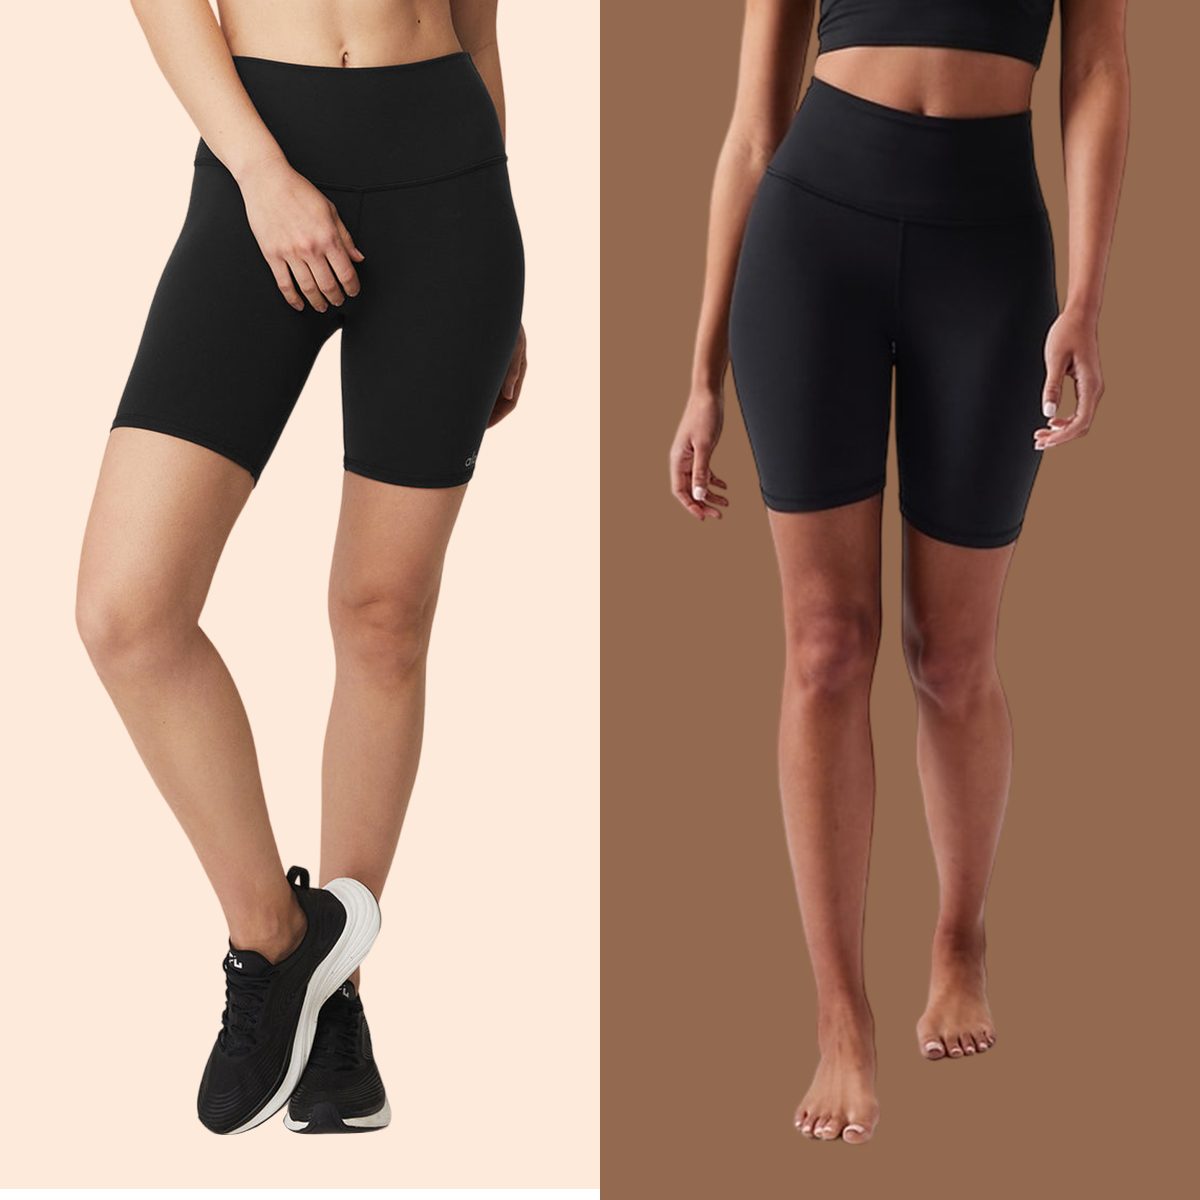 10 Anti-Chafing Shorts to Protect Your Thighs This Summer